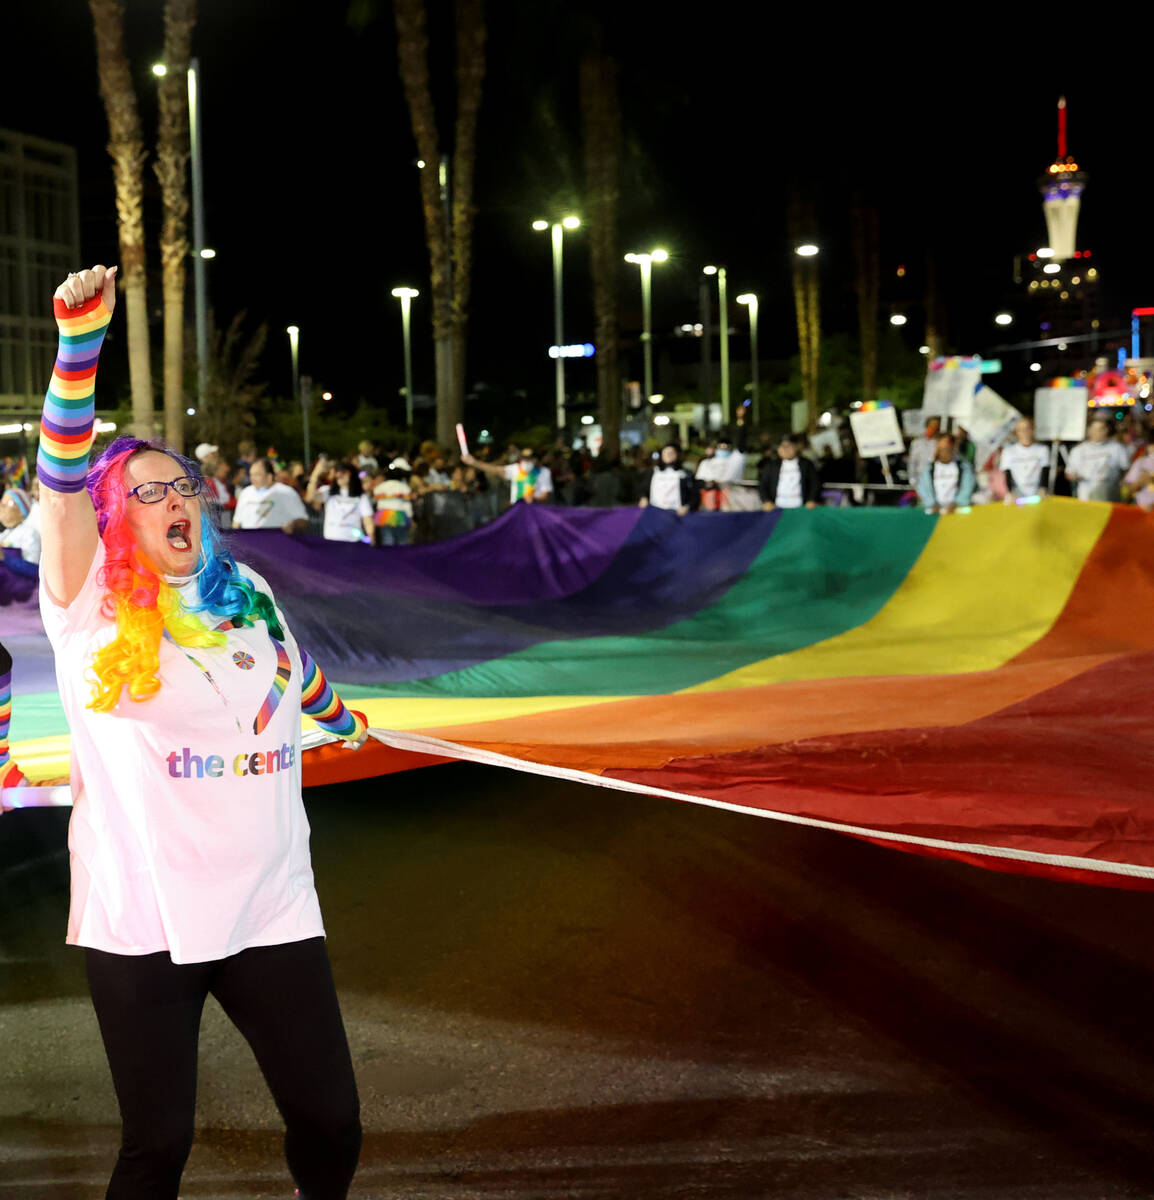 Members of The Center entry, including Michelle Pierson, march in the Las Vegas Pride Night par ...